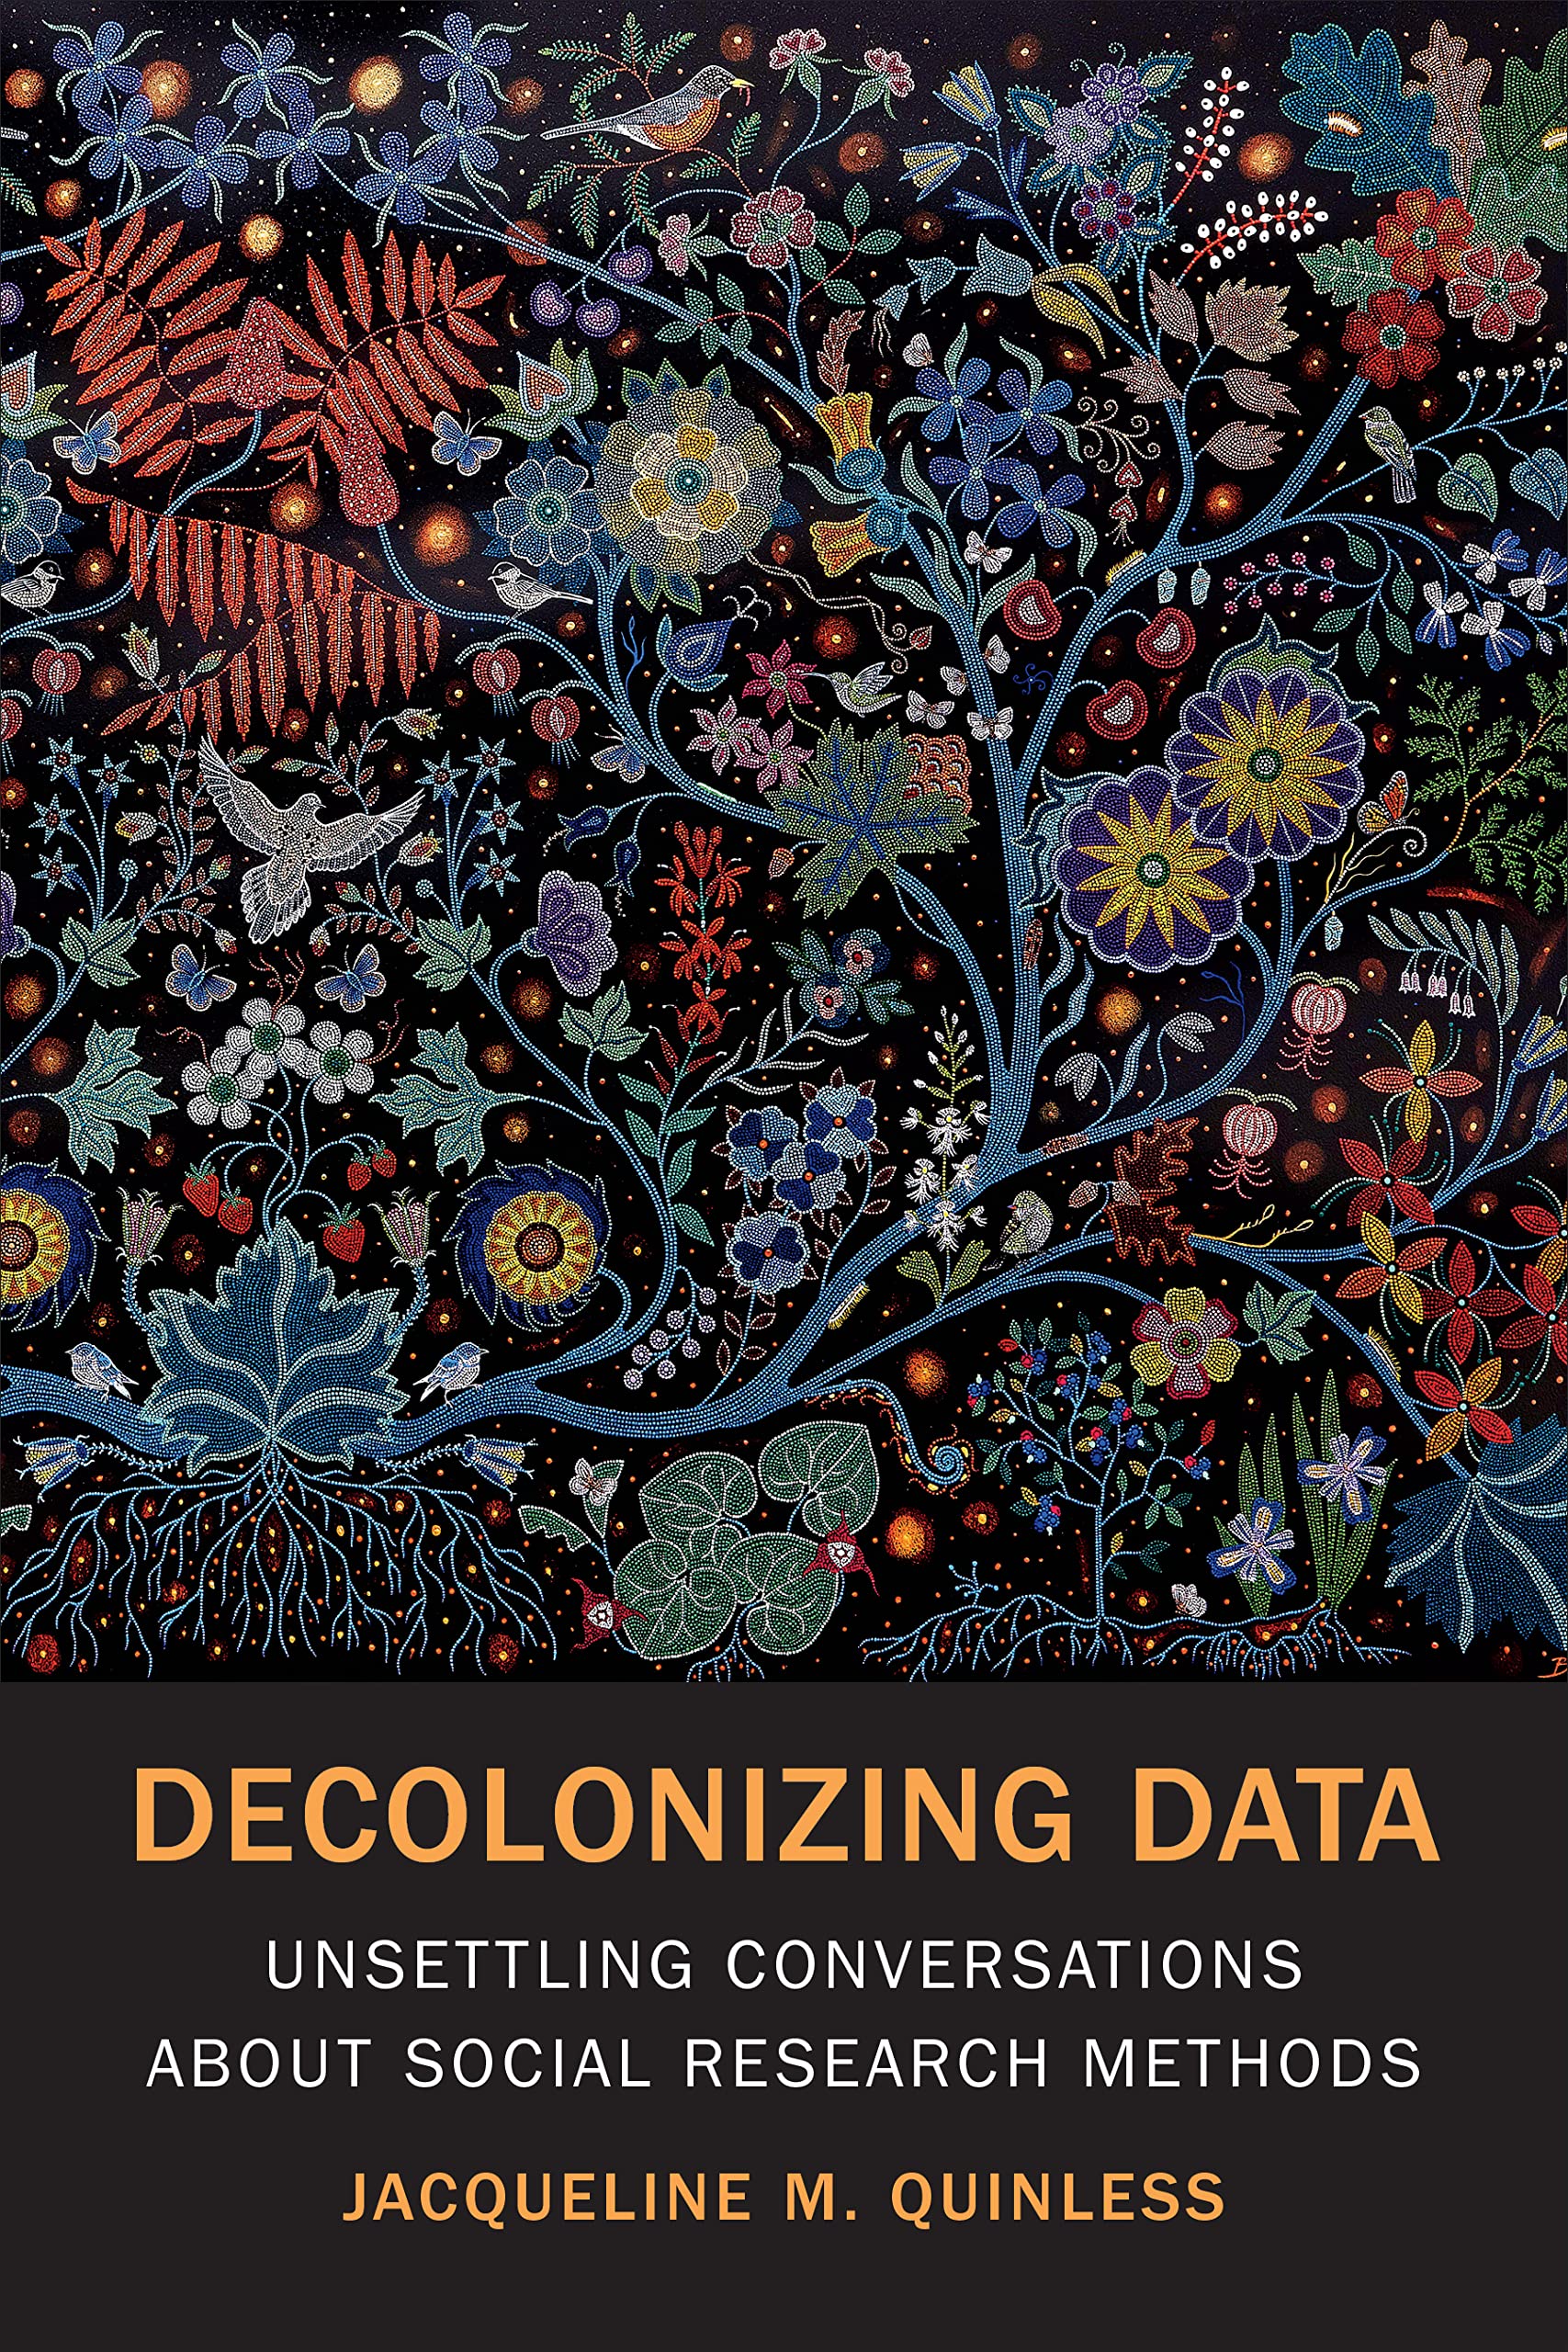 Image Decolonizing data : unsettling conversations about social research methods